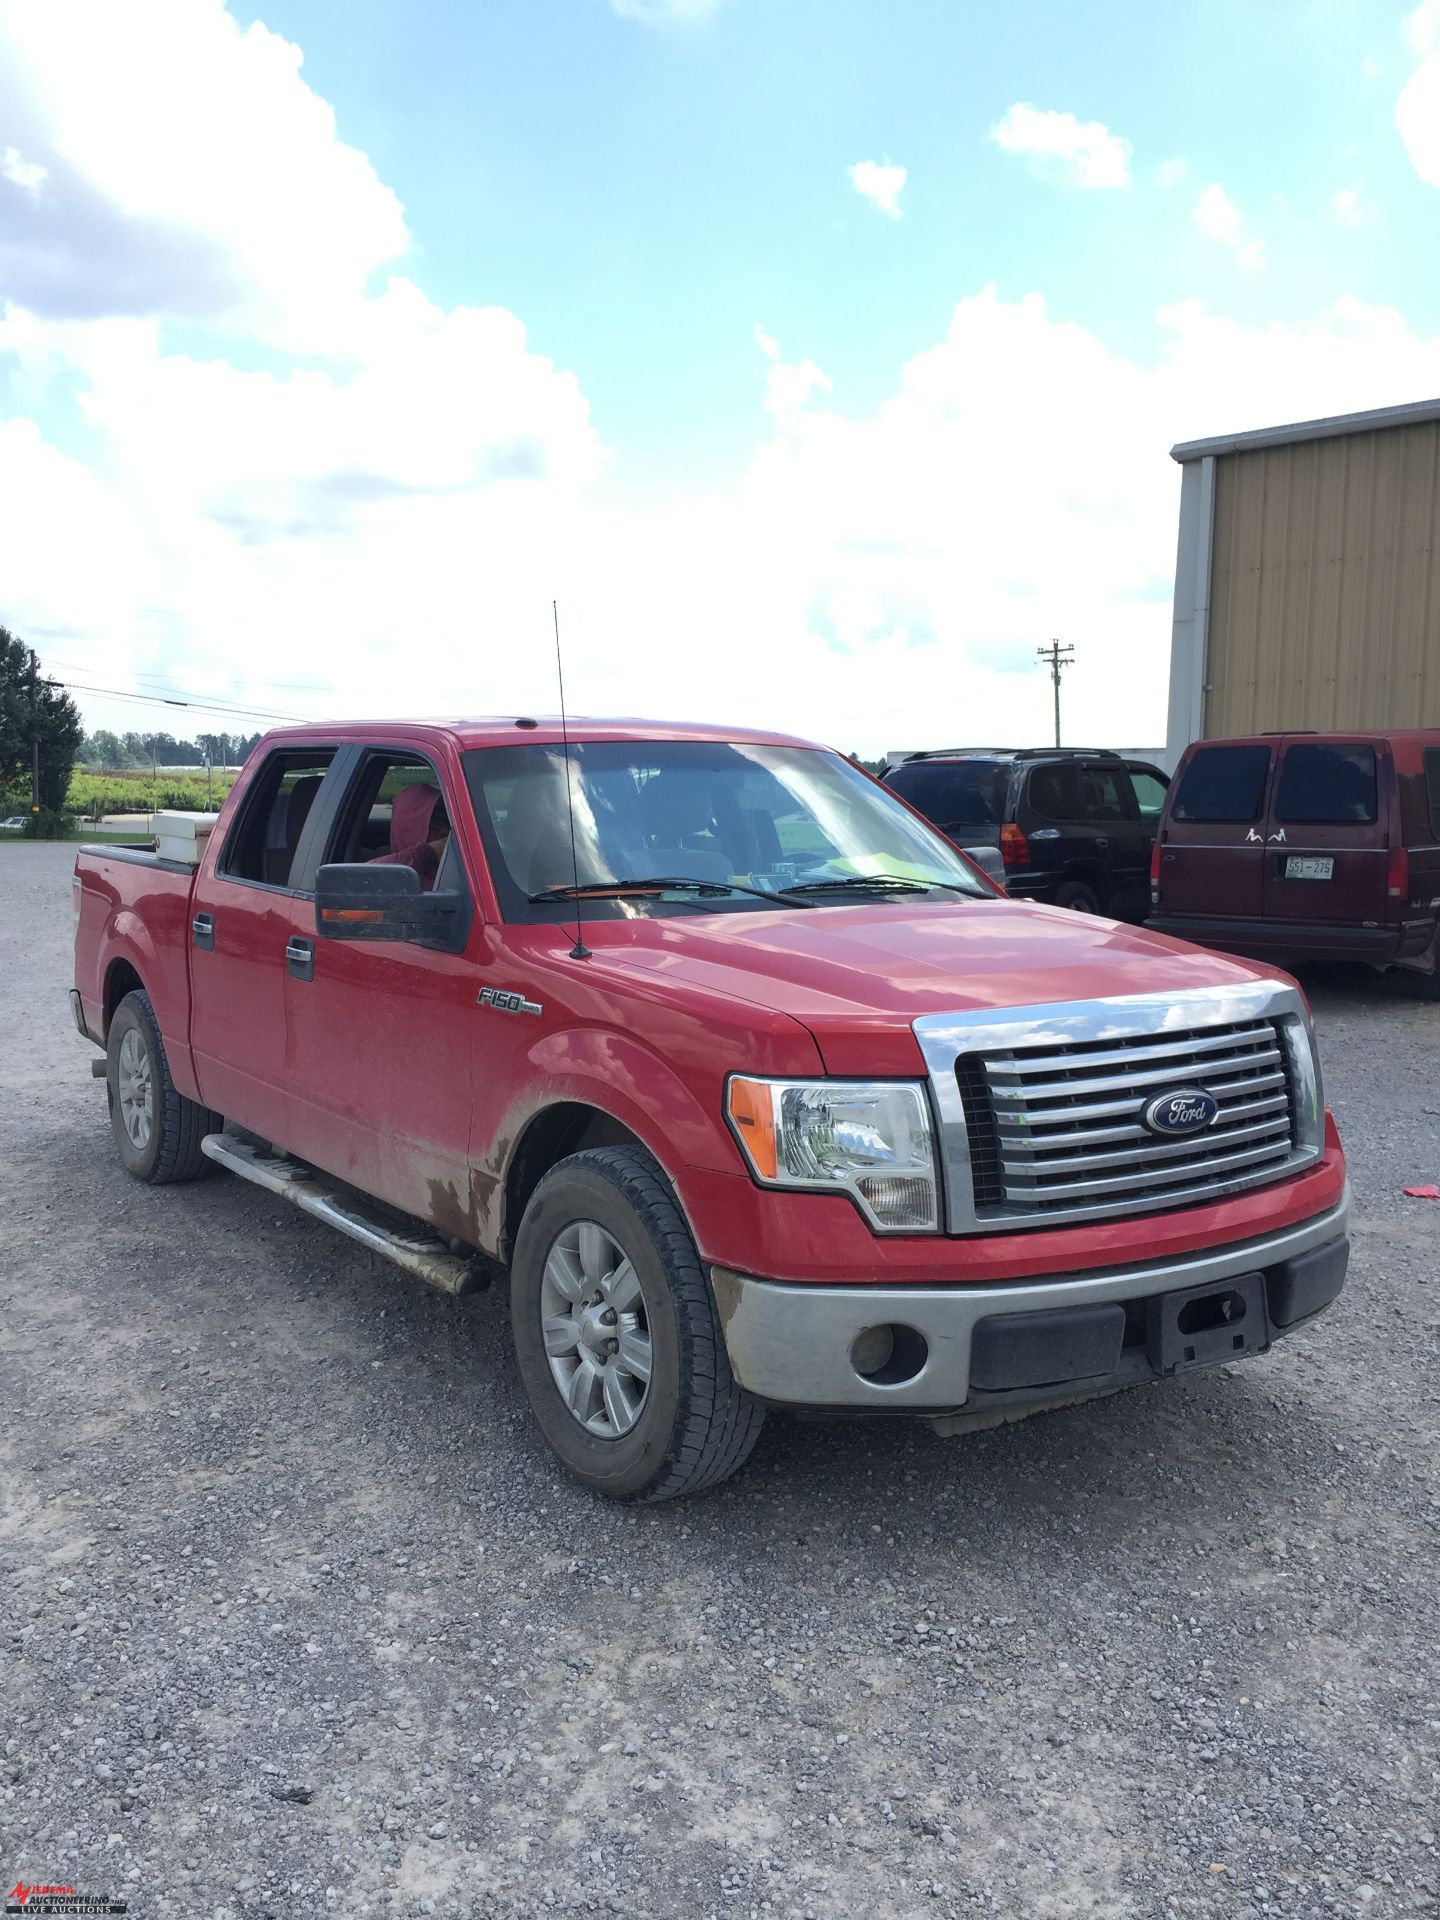 2010 FORD F150 CREW CAB PICKUP, SHORT BOX, 4 DOOR, 4.6L V8 GAS ENGINE, AUTOMATIC TRANS, AM/FM/CD, - Image 2 of 6